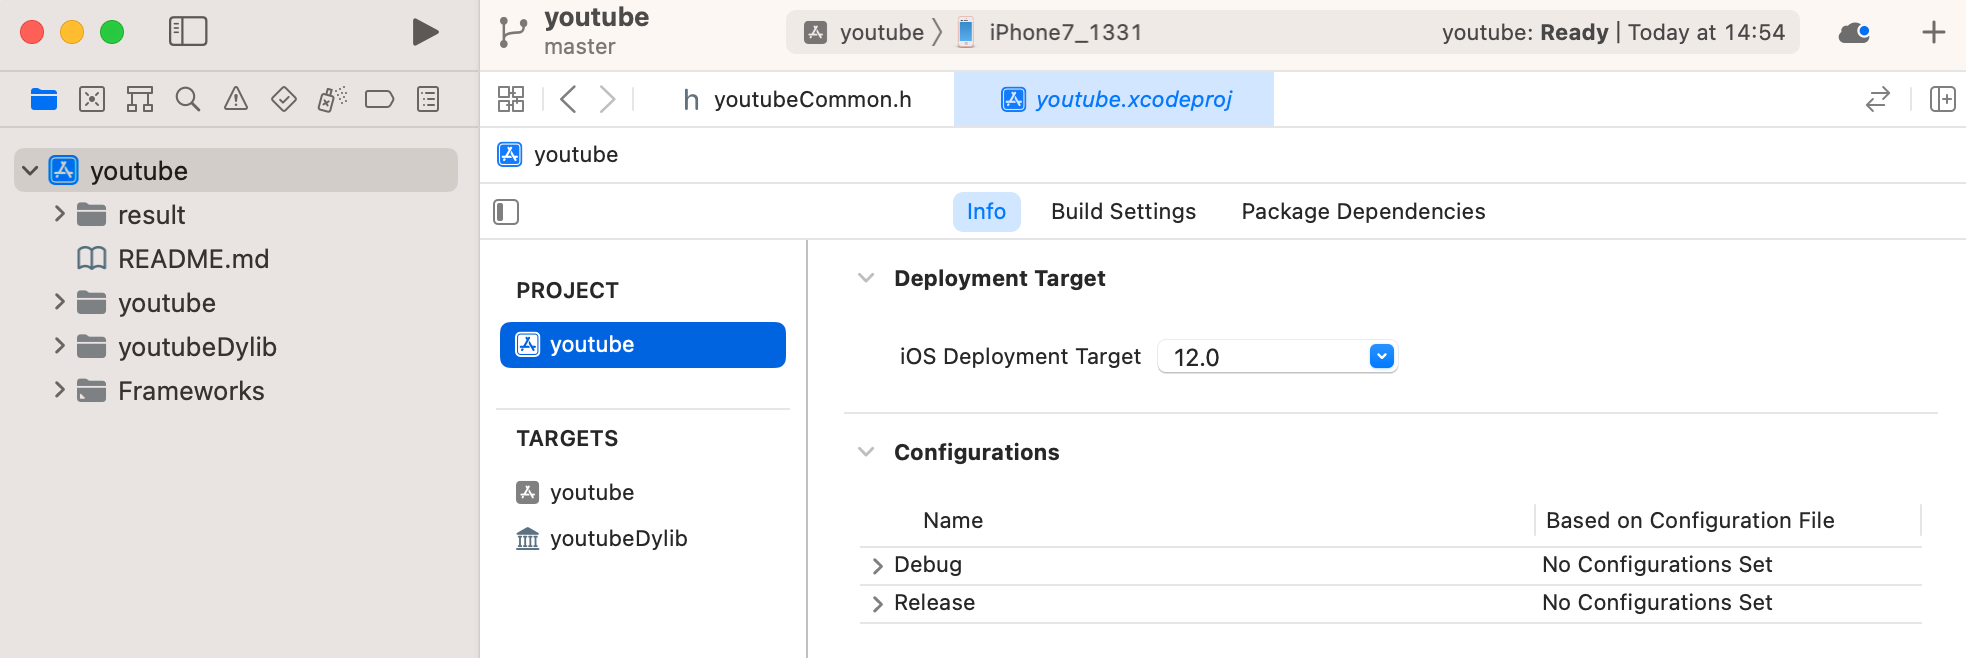 xcode_project_deployment_target_ios_12